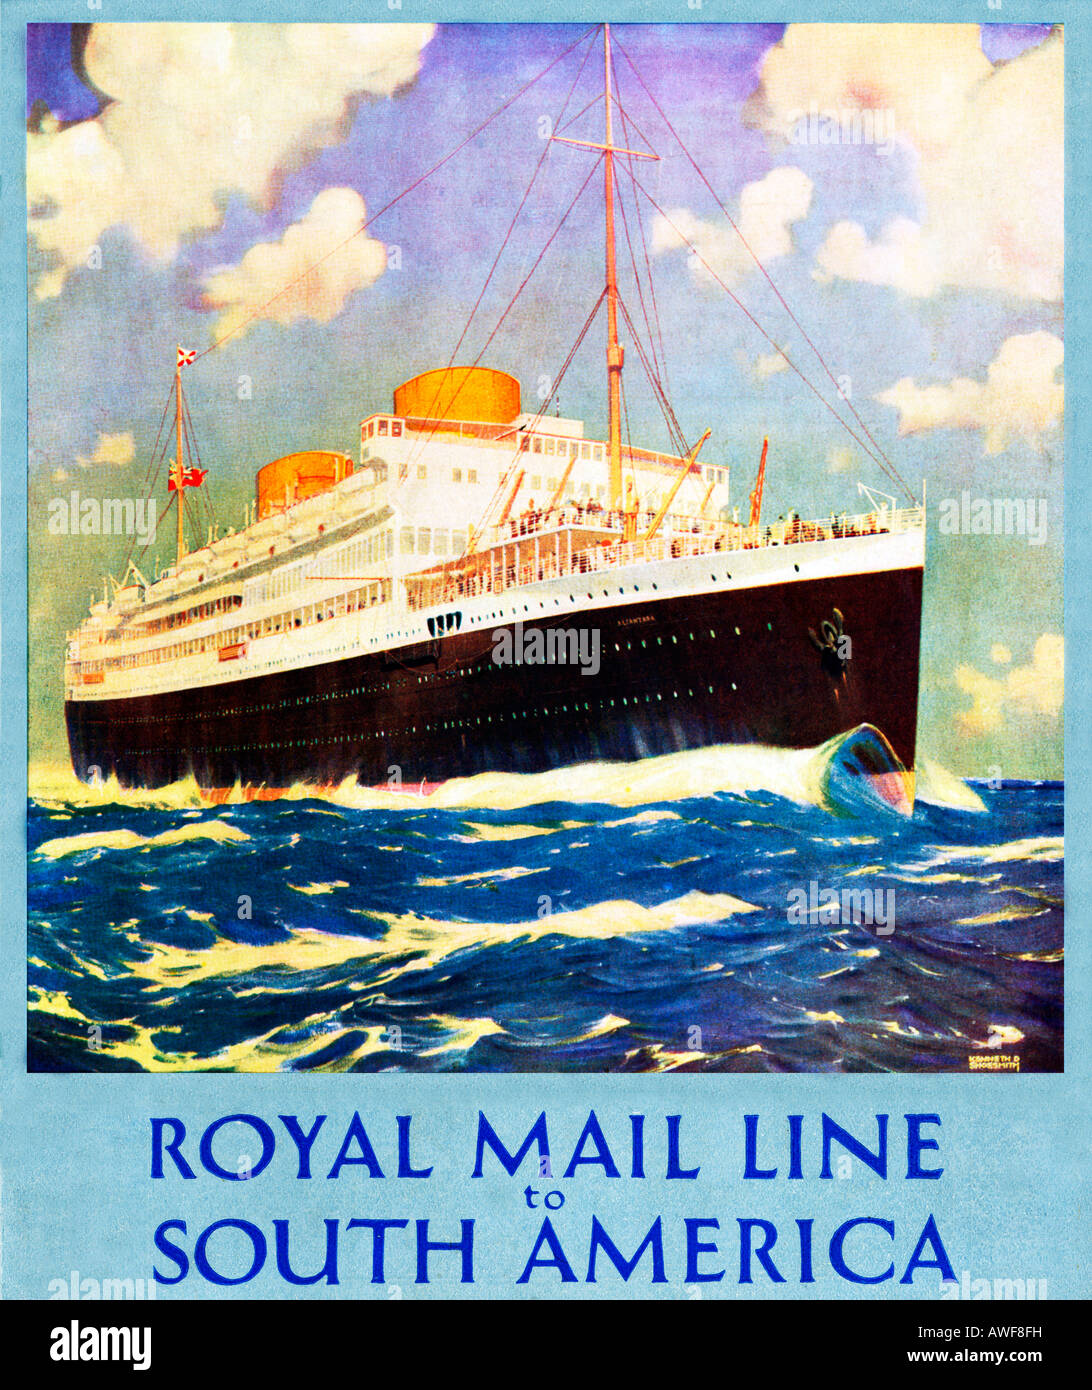 Photo B.003170 SS AMAZON 1906 ROYAL MAIL LINE PAQUEBOT OCEAN LINER 